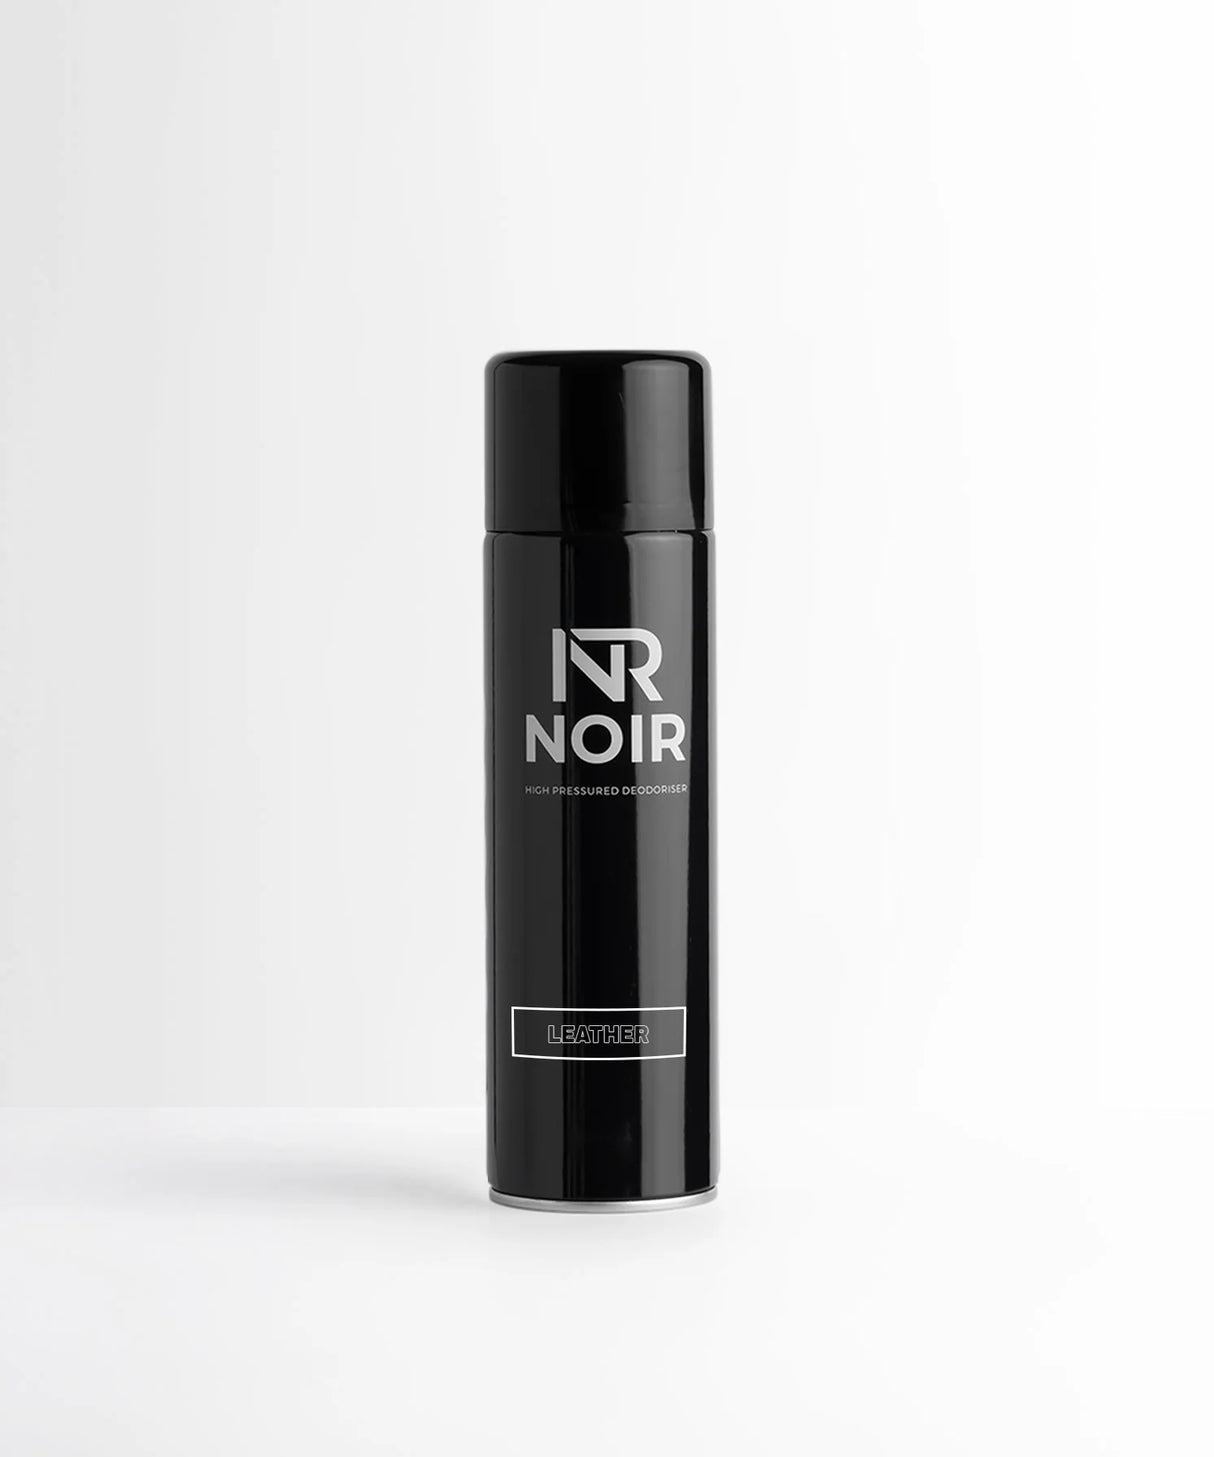 NOIR Leather Luxury Air Freshener - Inspired by Tom Ford